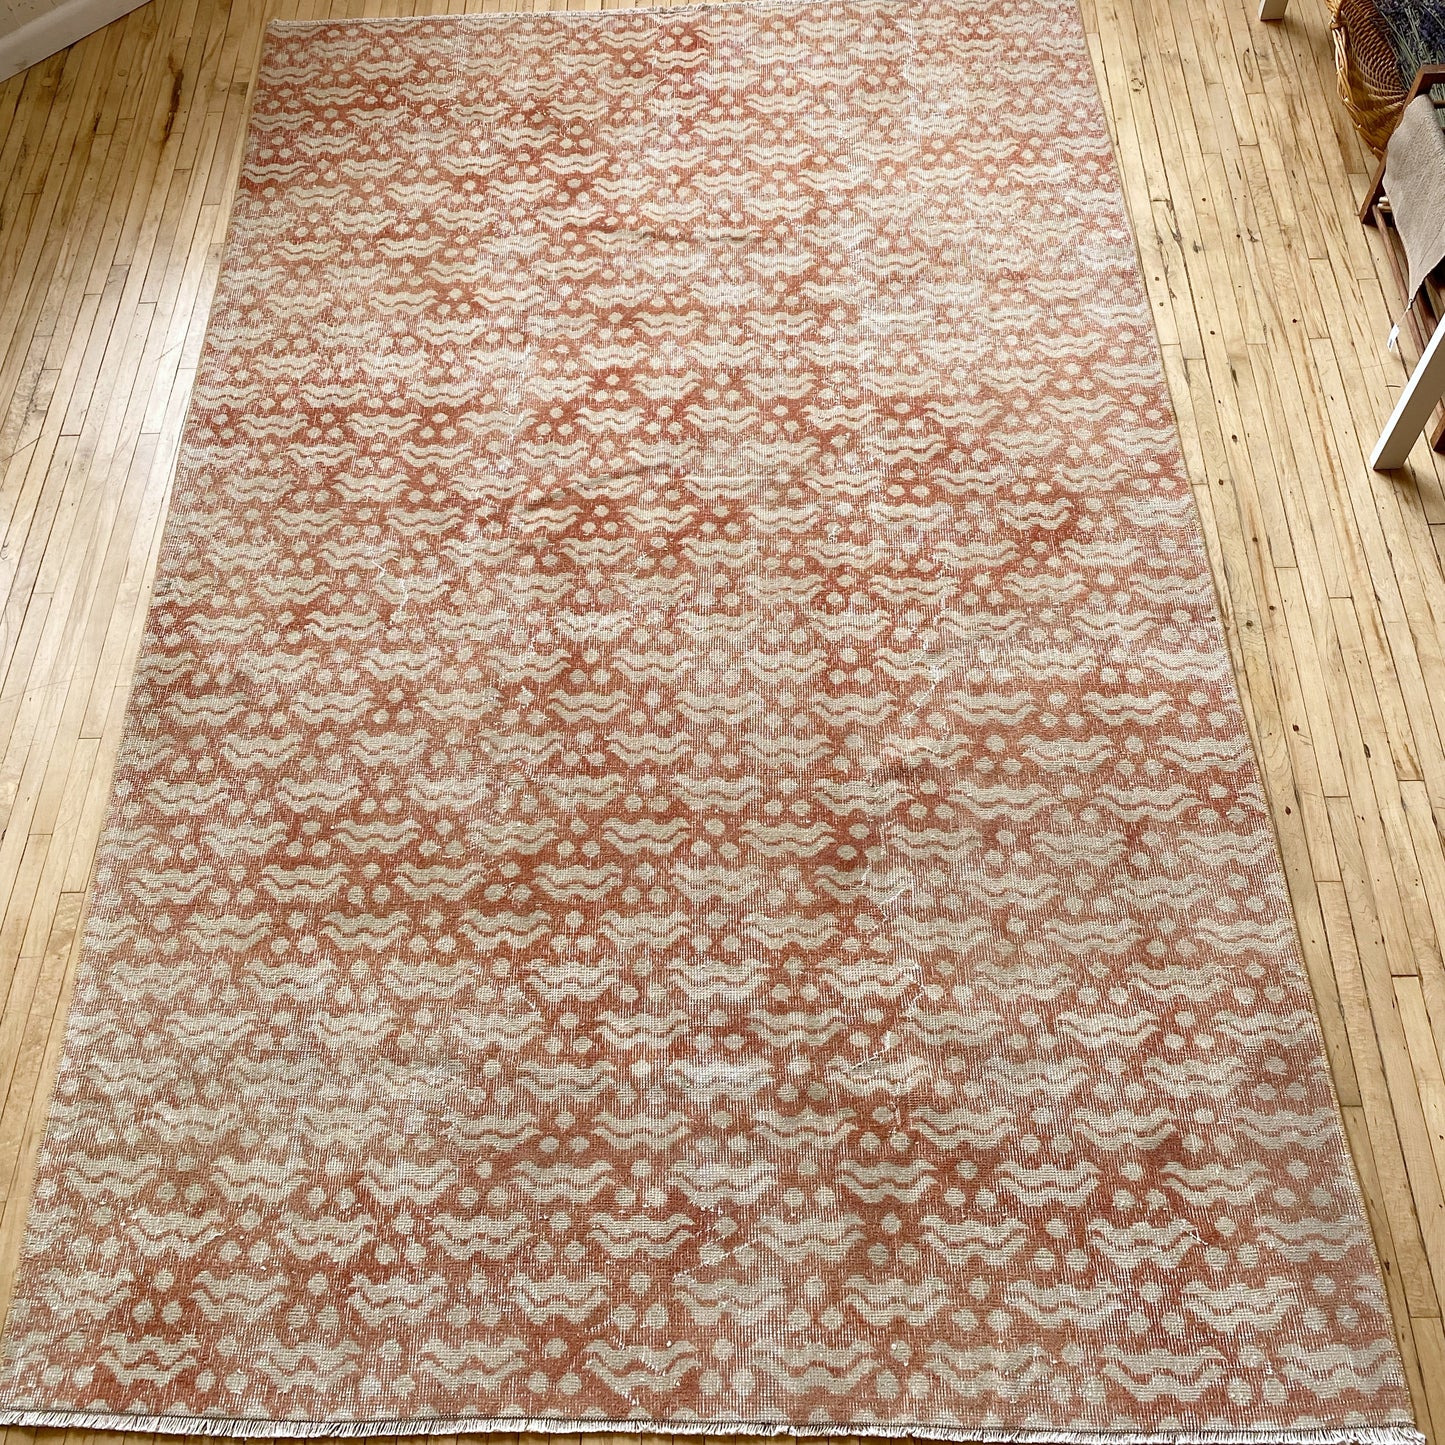 "INES" Vintage Hand-knotted Rug (5’11” x 9’2”)